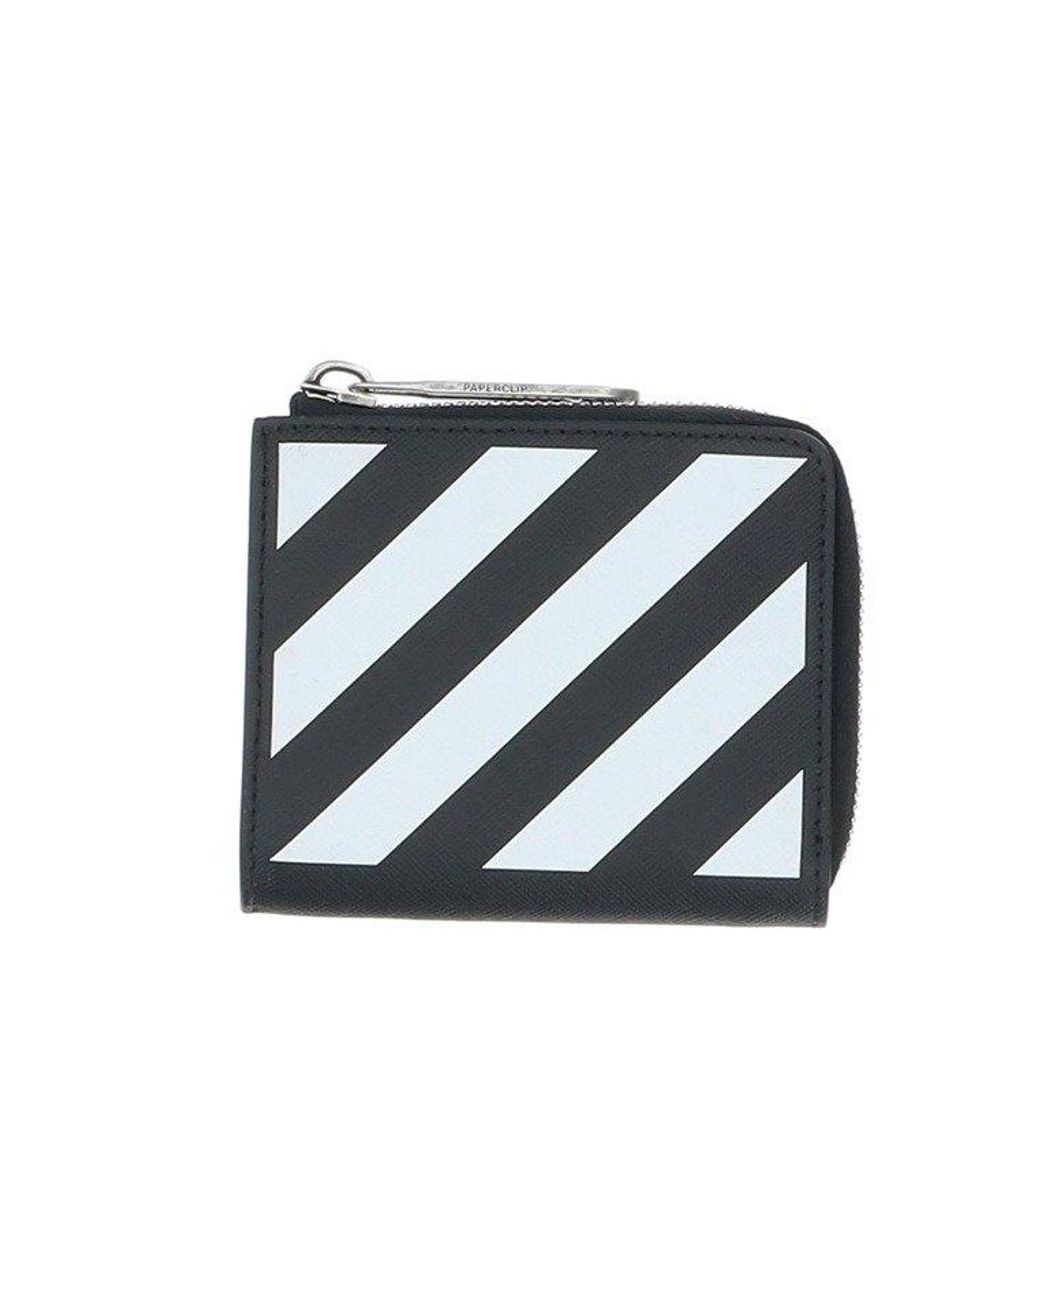 Off-White c/o Virgil Abloh Leather Wallets & Cardholders in Black for Men Mens Accessories Wallets and cardholders 